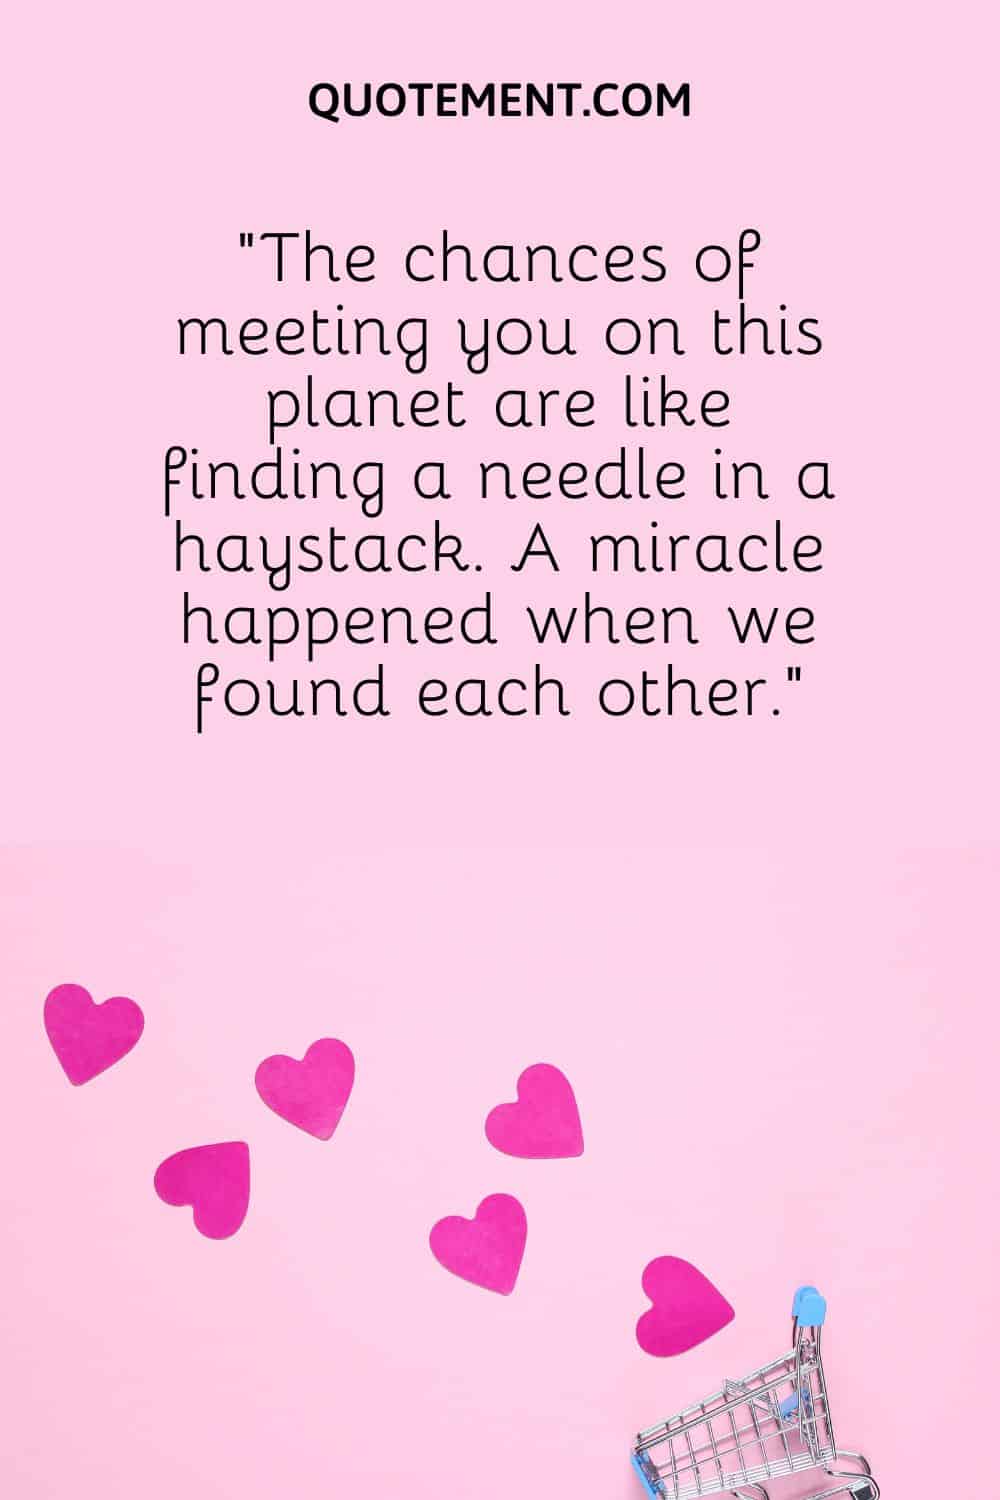 “The chances of meeting you on this planet are like finding a needle in a haystack. A miracle happened when we found each other.”